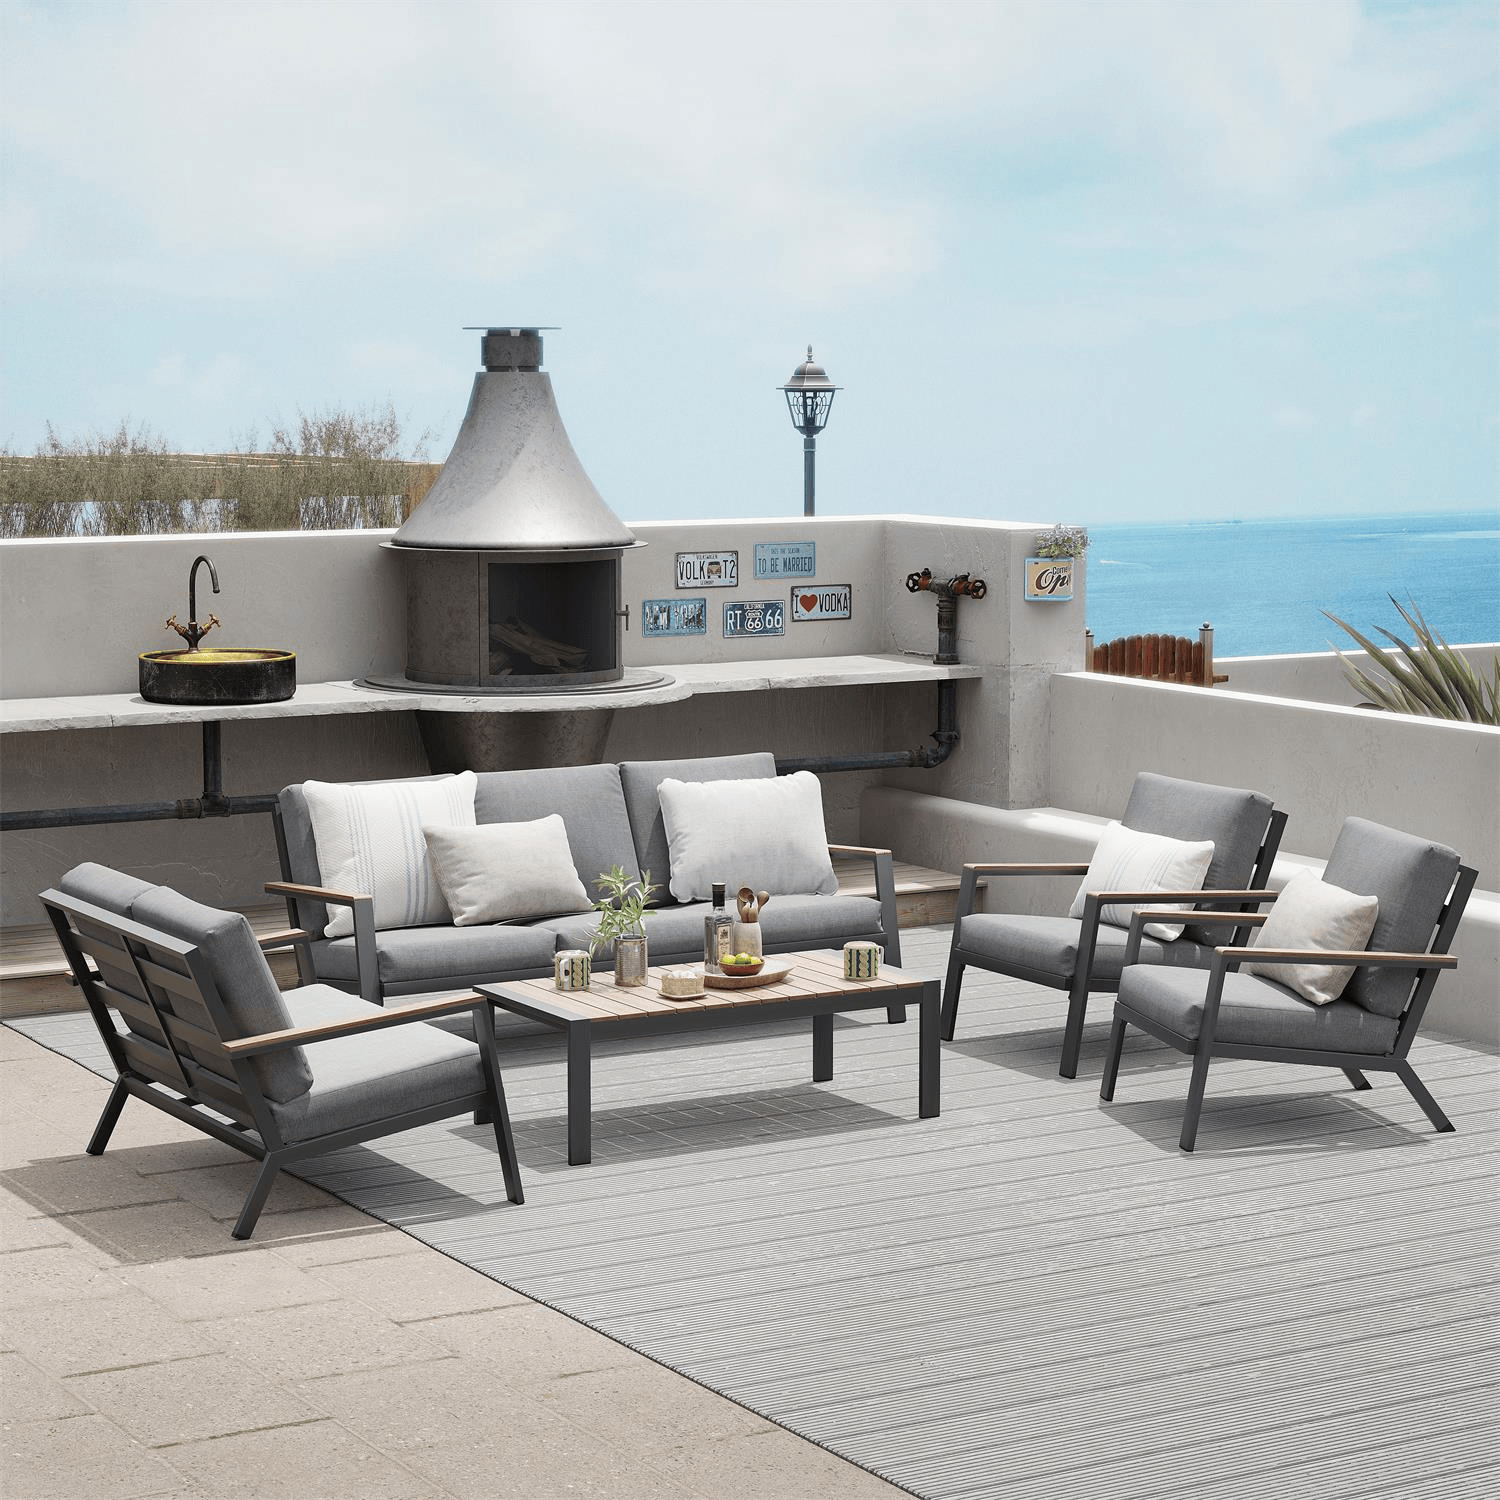 Ronda Collection Furniture, All-aluminum with Wider and Deeper Seating - Jardina European & Modern Outdoor Patio Furniture